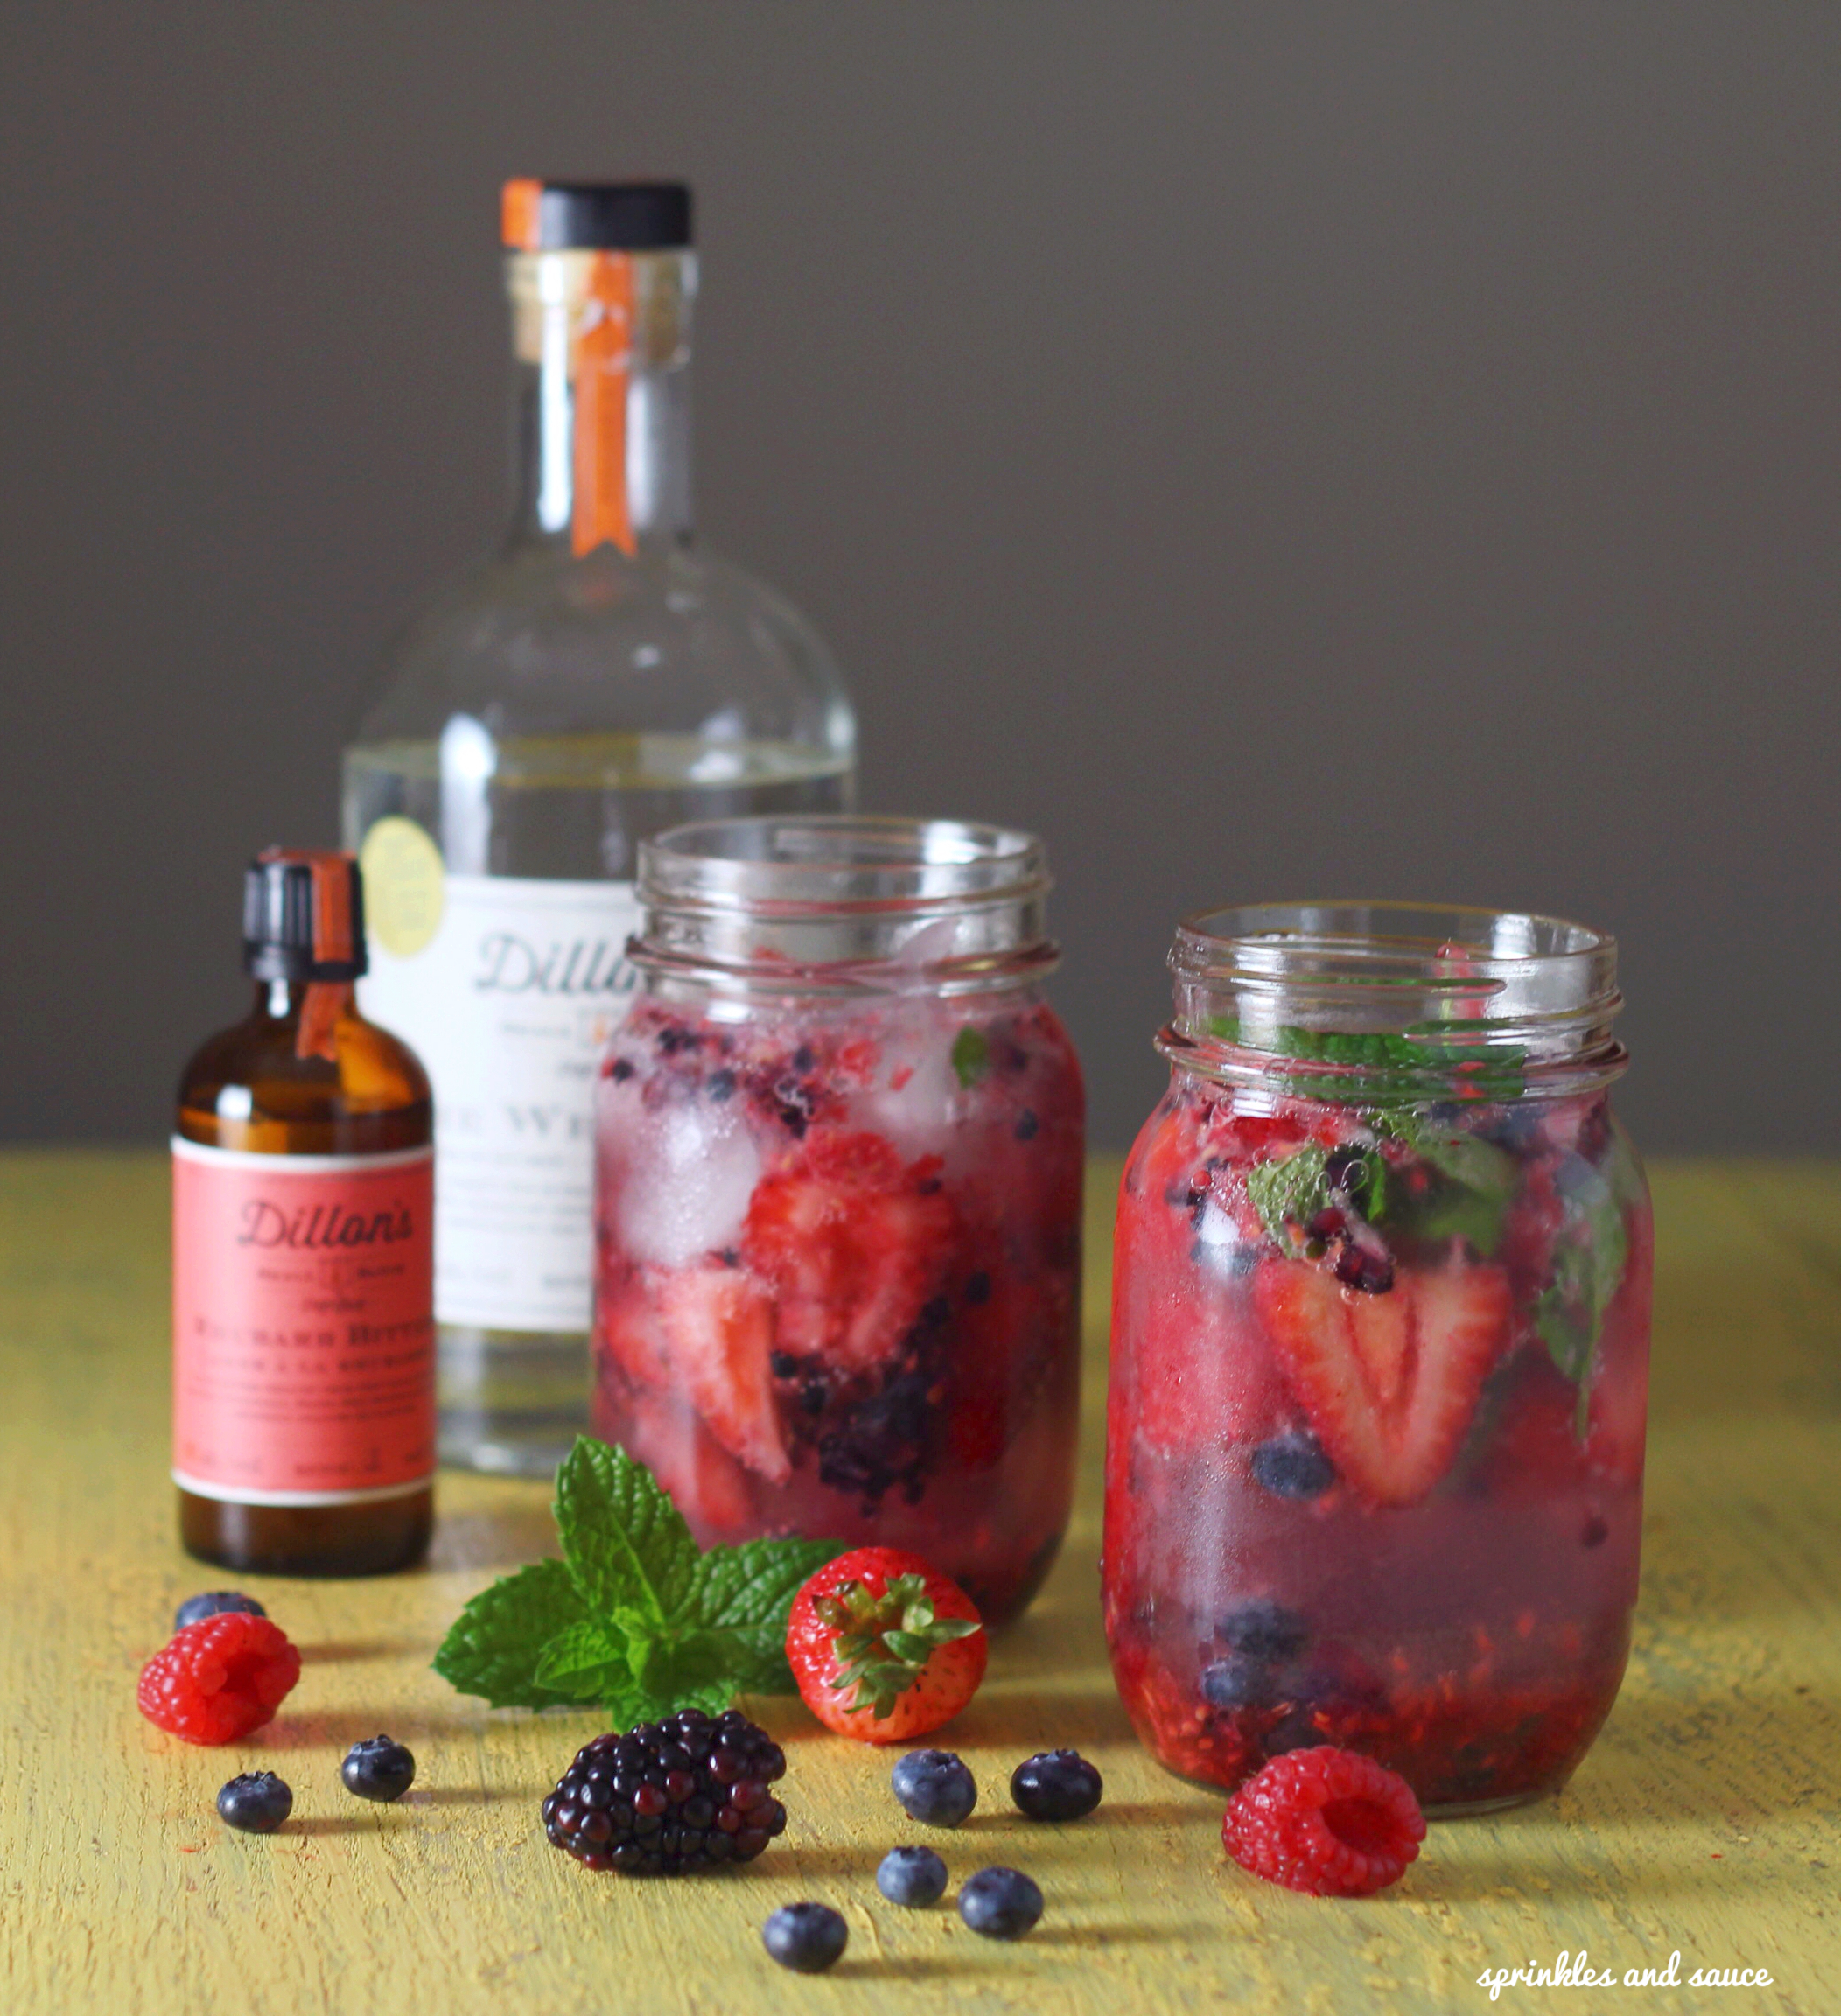 Smashed Berries Spritzer with White Rye and Rhubarb Bitters